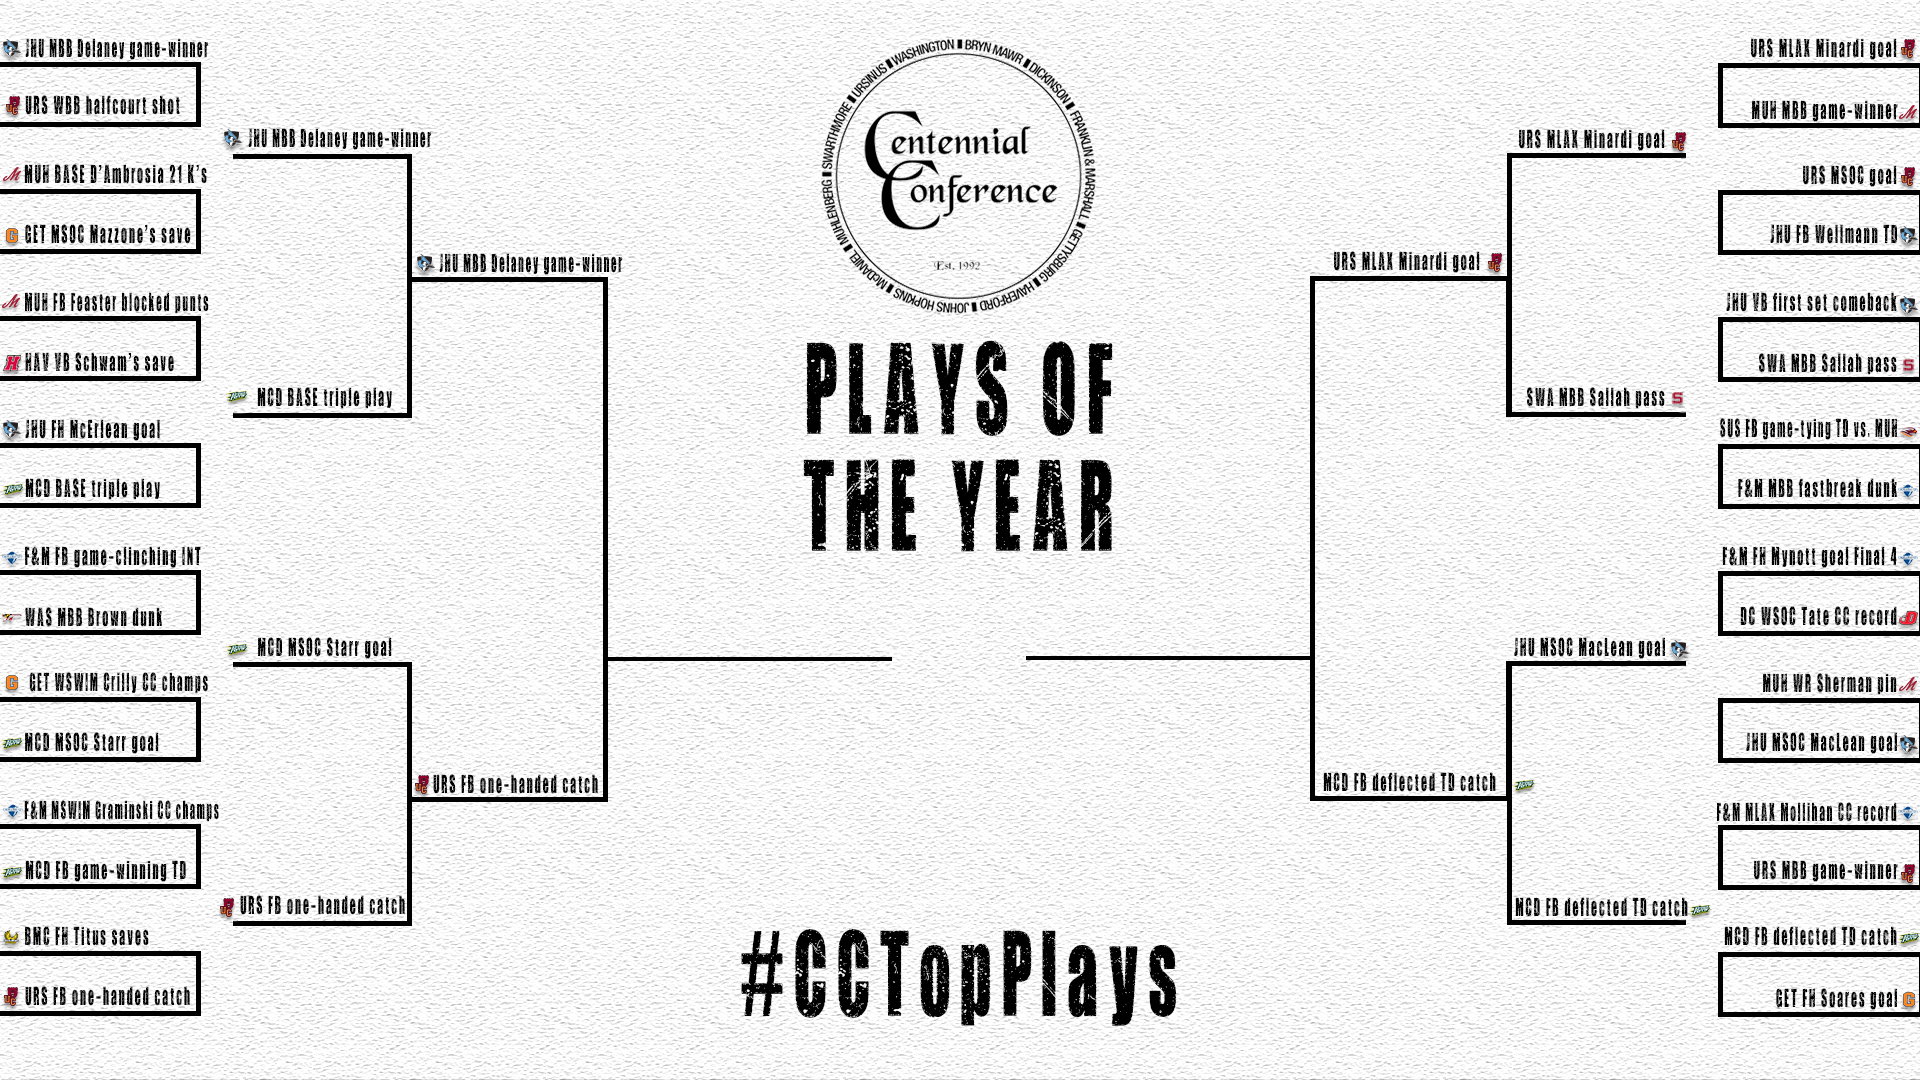 Semifinals Set for Top Play of the Year Challenge